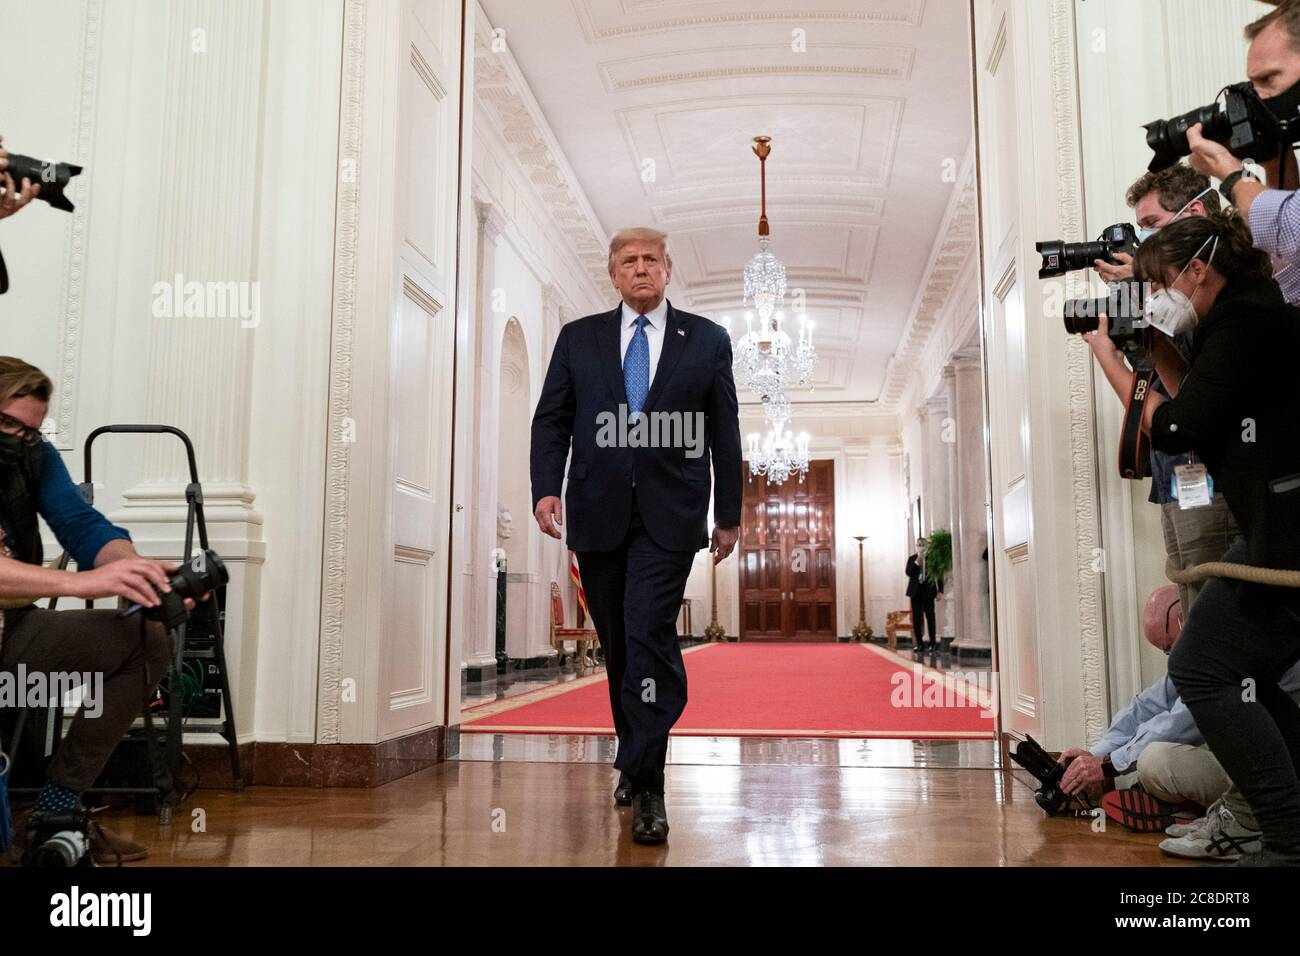 Washington, United States Of America. 22nd July, 2020. Washington, United States of America. 22 July, 2020. U.S. President Donald Trump arrives for the announcement of Operation Legend, to combat violent crime in the East Room of the White House July 22, 2020 in Washington, DC Trump plans to send federal law enforcement to cities around the country in what is widely viewed as an attempt to suppress Black Lives Matter protests. Credit: Shealah Craighead/White House Photo/Alamy Live News Stock Photo